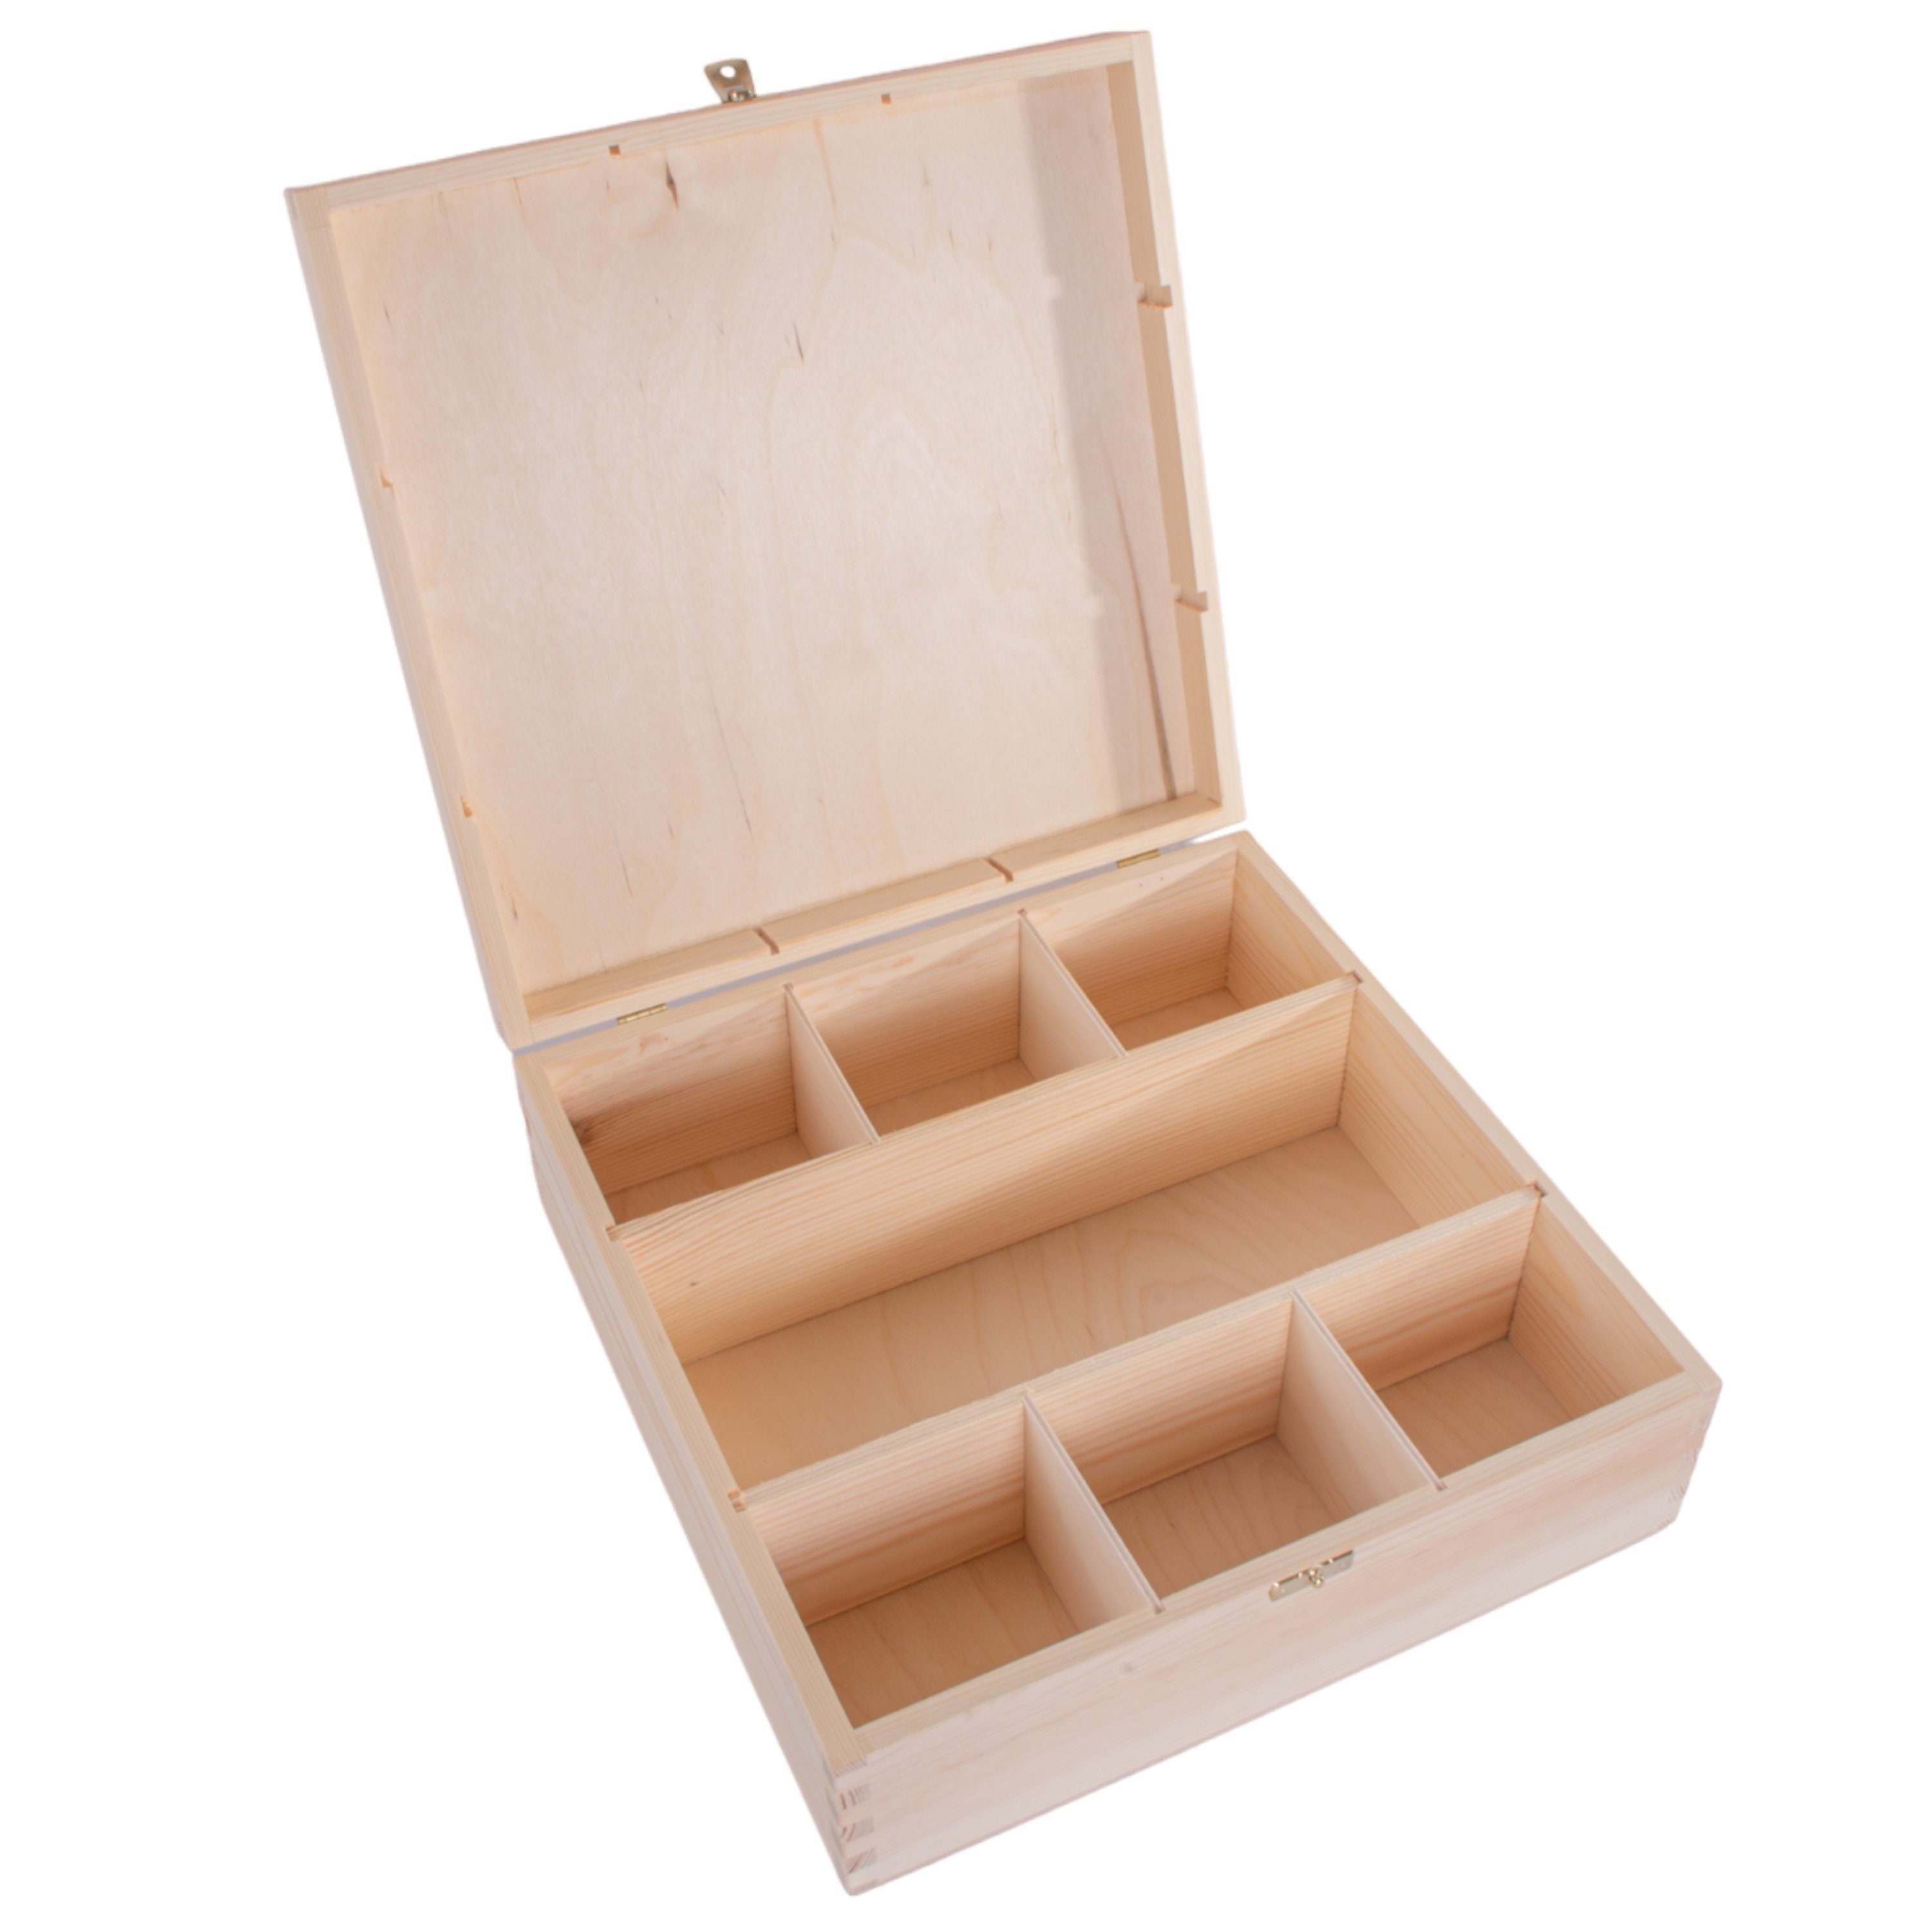 Wooden Storage Box for whisky Bottle & 6 Glasses Memory Keepsake Box With  Lid Compartments Sections Plain Unfinished Wood for Craft 